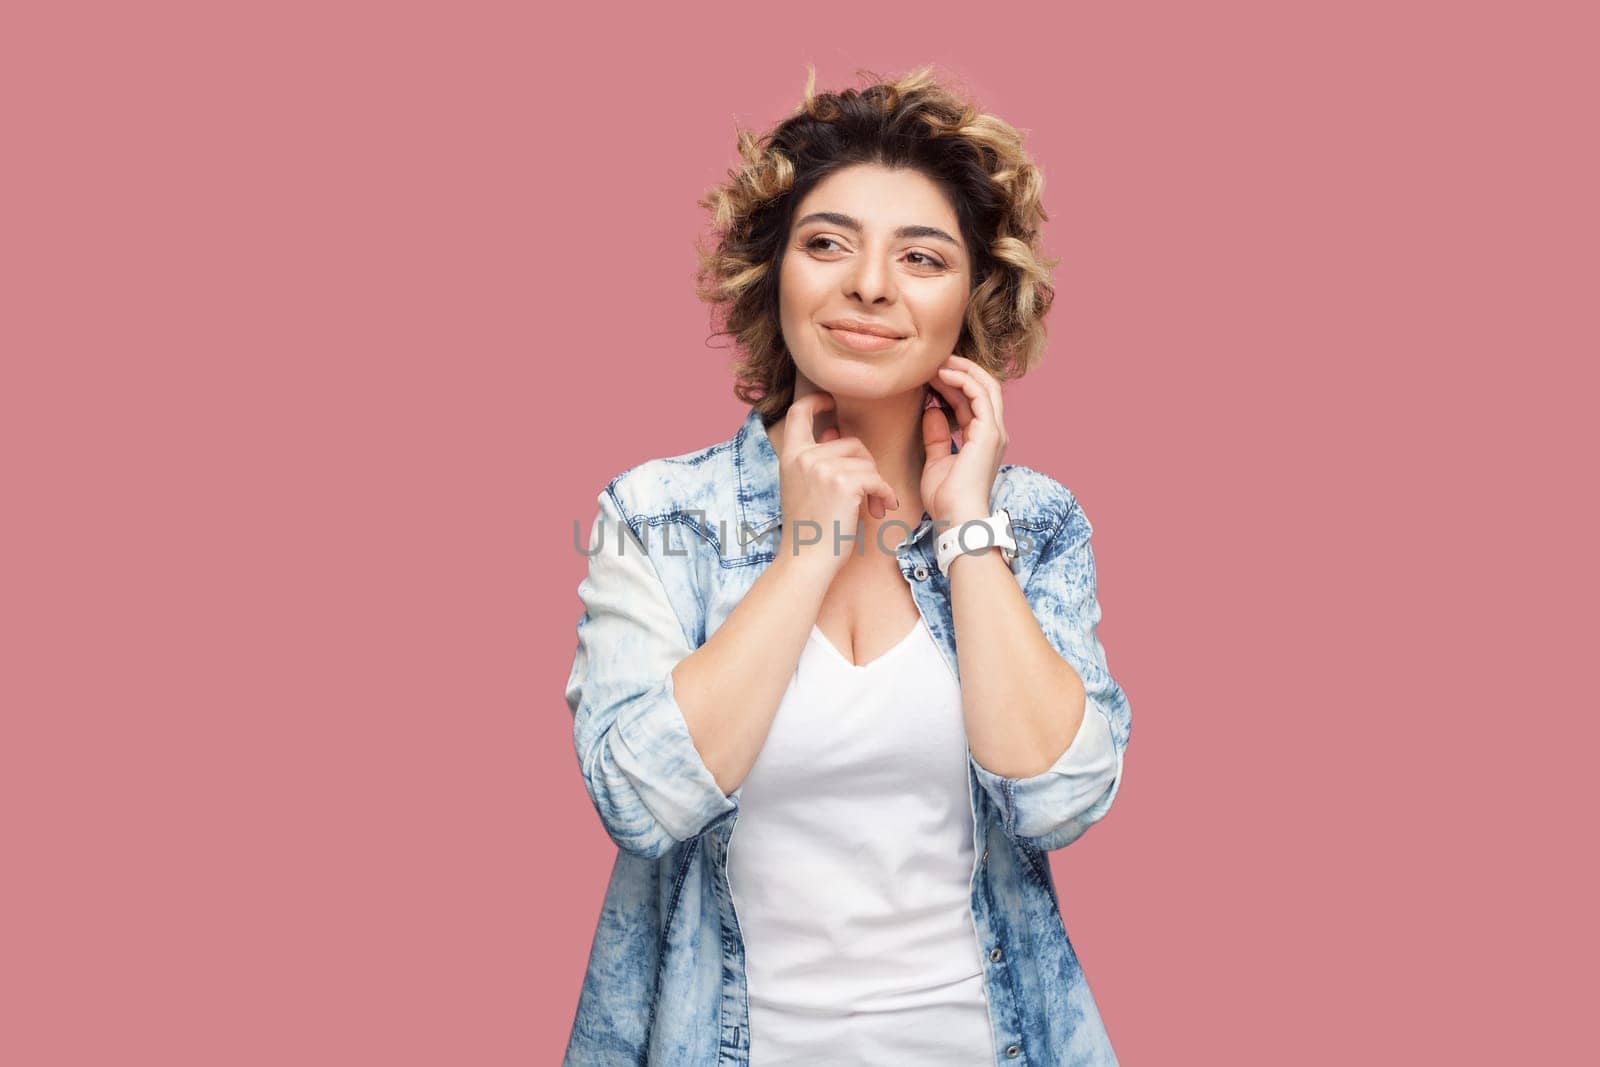 Portrait of smiling beautiful woman with curly hairstyle wearing blue shirt standing looking away, smiling, dreaming about something pleasant. Indoor studio shot isolated on pink background.